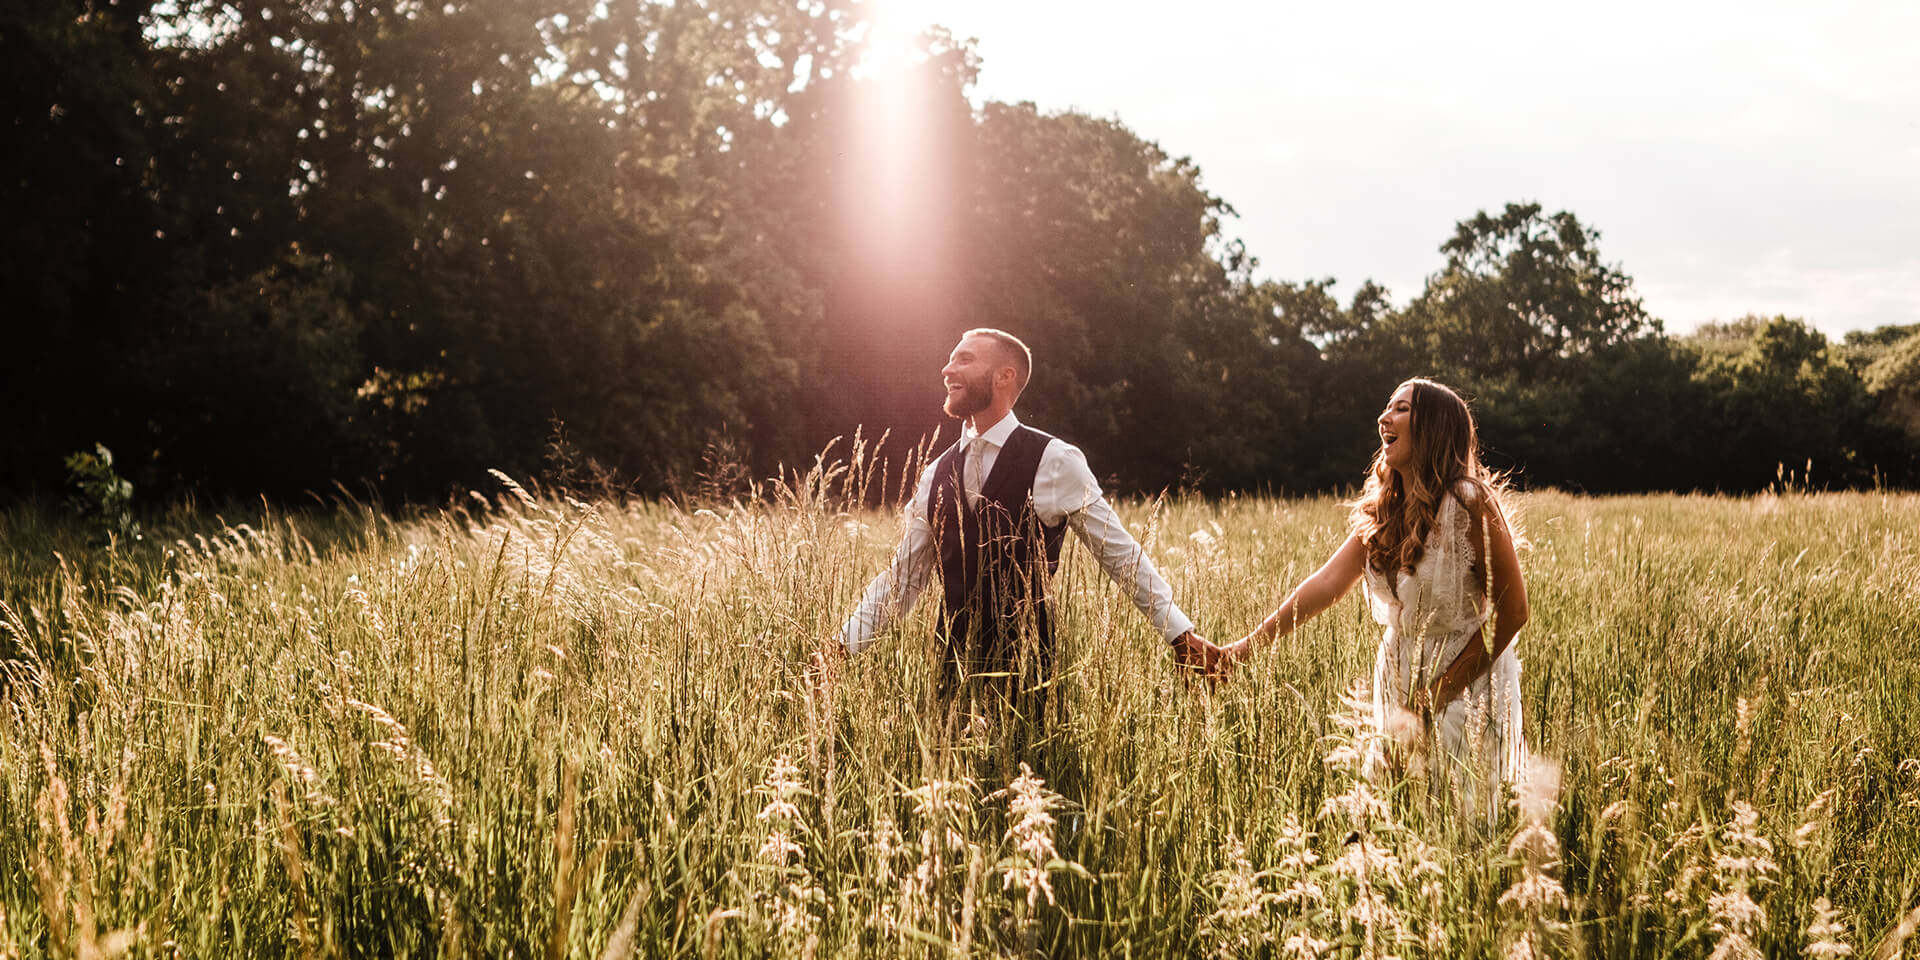 The bride and groom explore the beautiful gardens of this Hampshire wedding venue